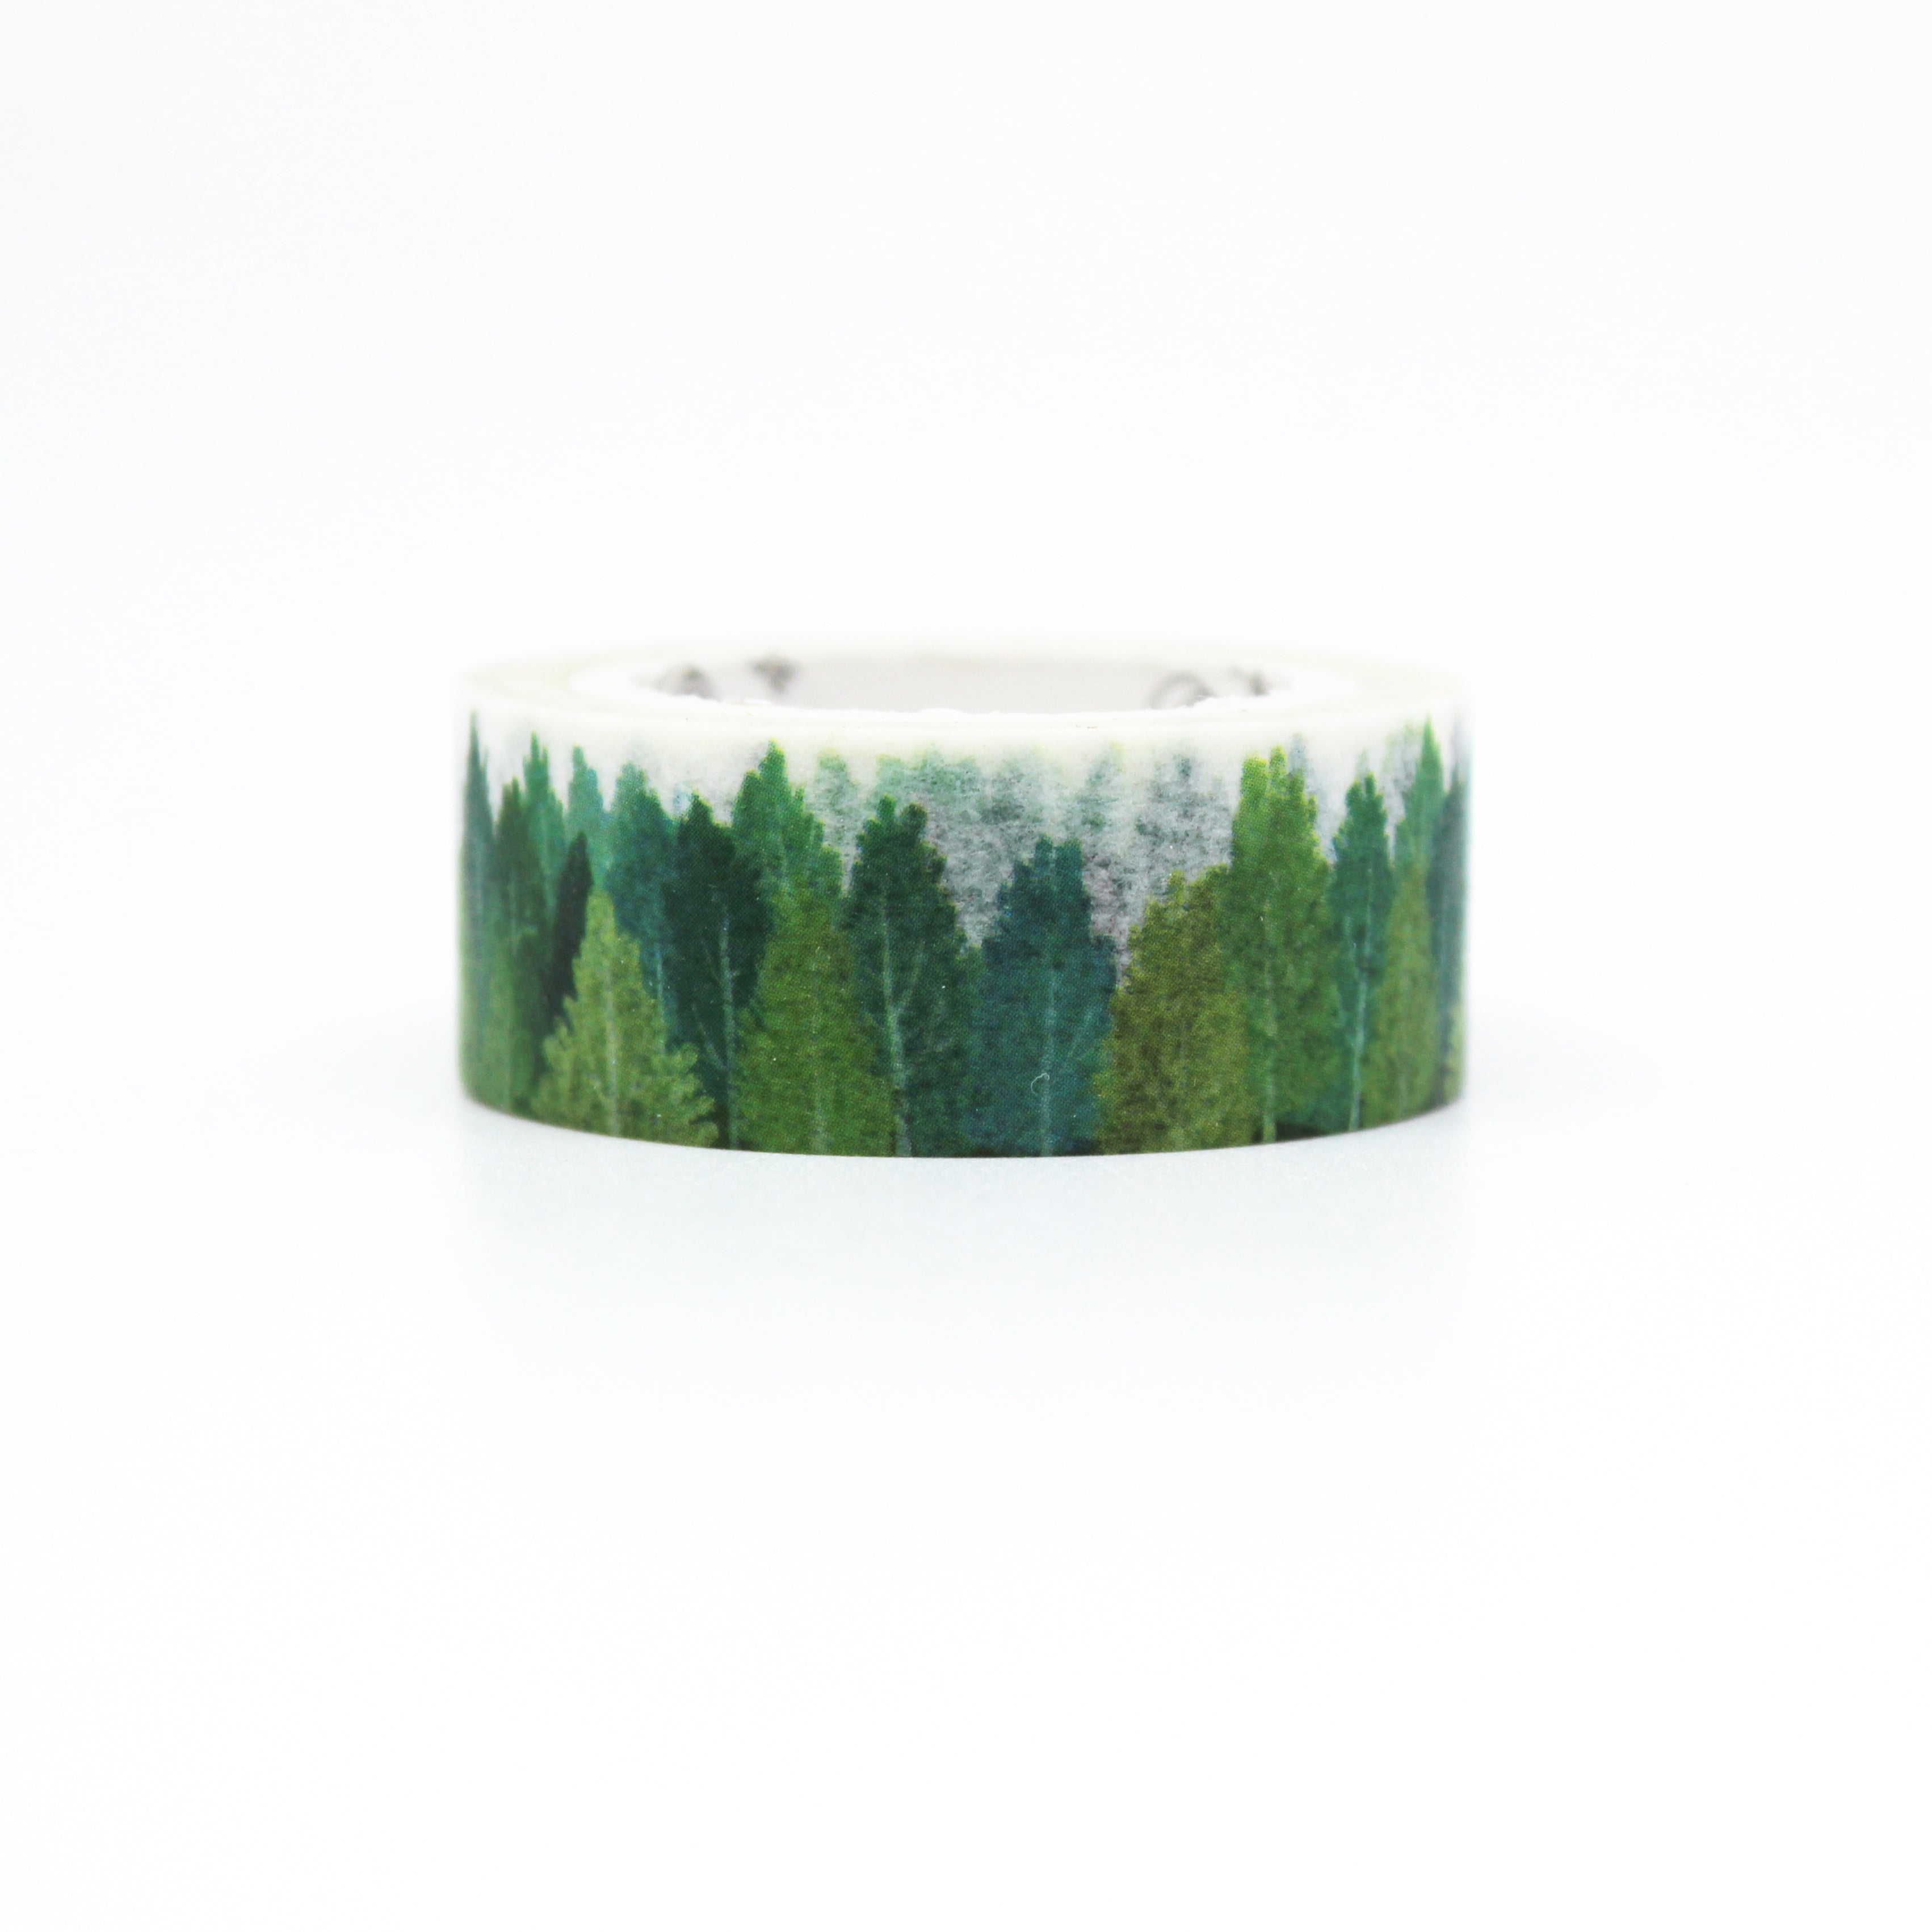 This is a nice view of green layered forest landscape tree washi tape from BBB Supplies Craft Shop